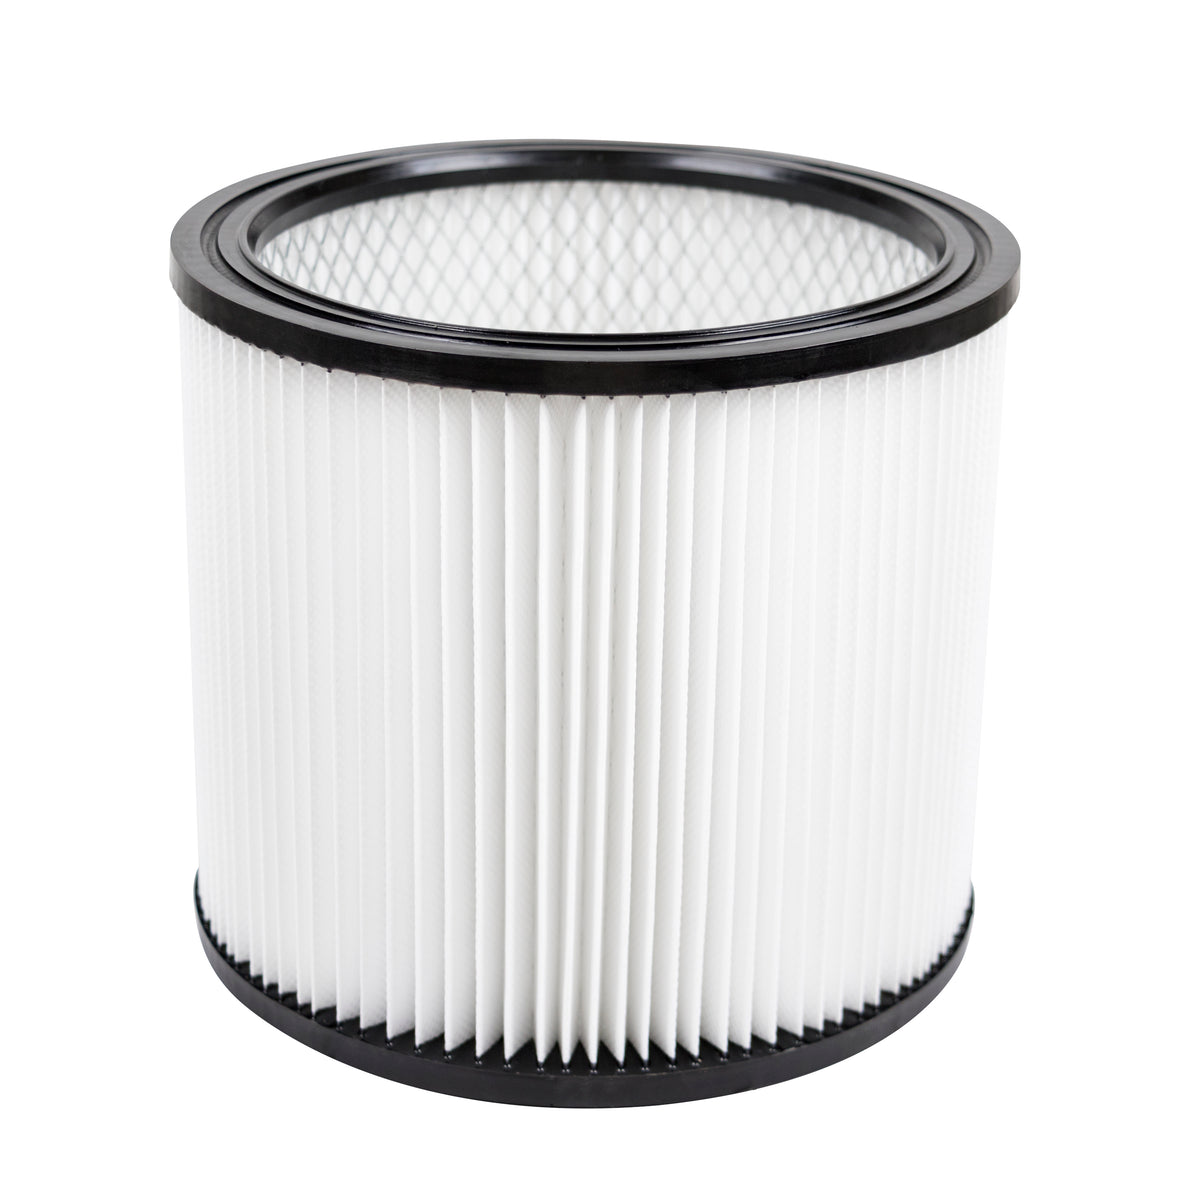 Universal ™  Standard Cartridge Filter for 5-18 Gallon Wet/Dry Vacuums